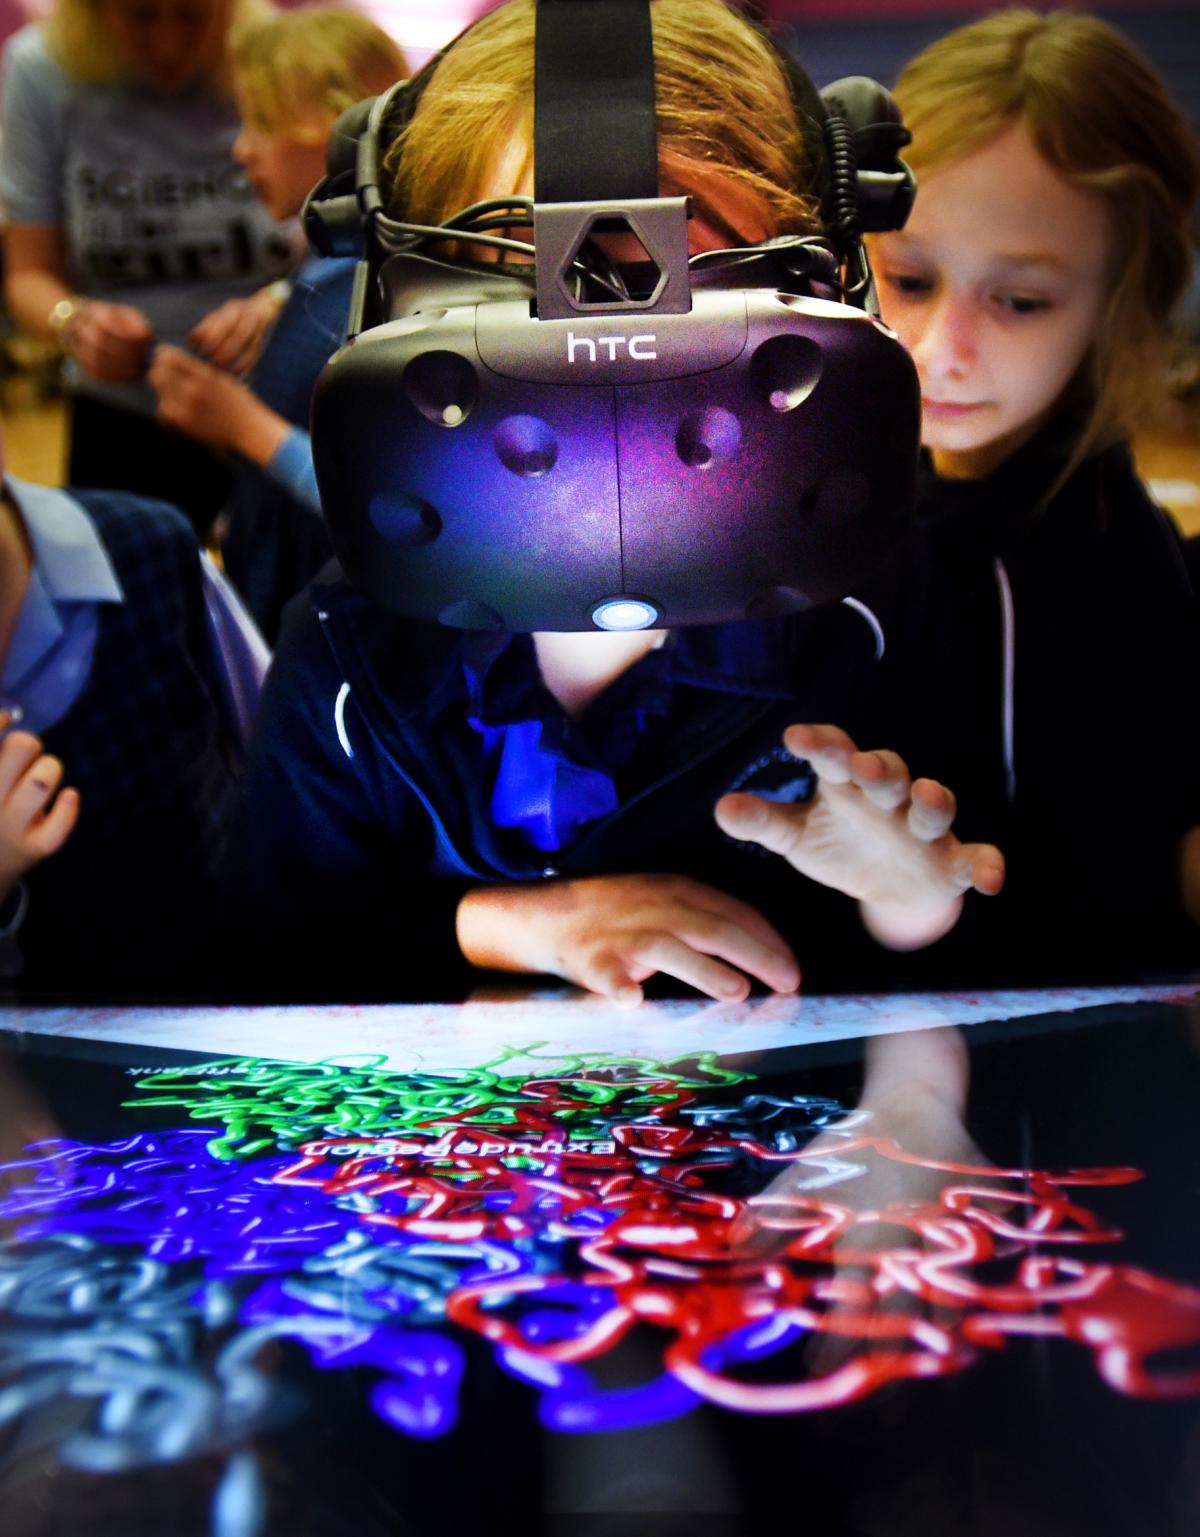 Virtual reality tech allows schoolgirls to see DNA 'unfold' at